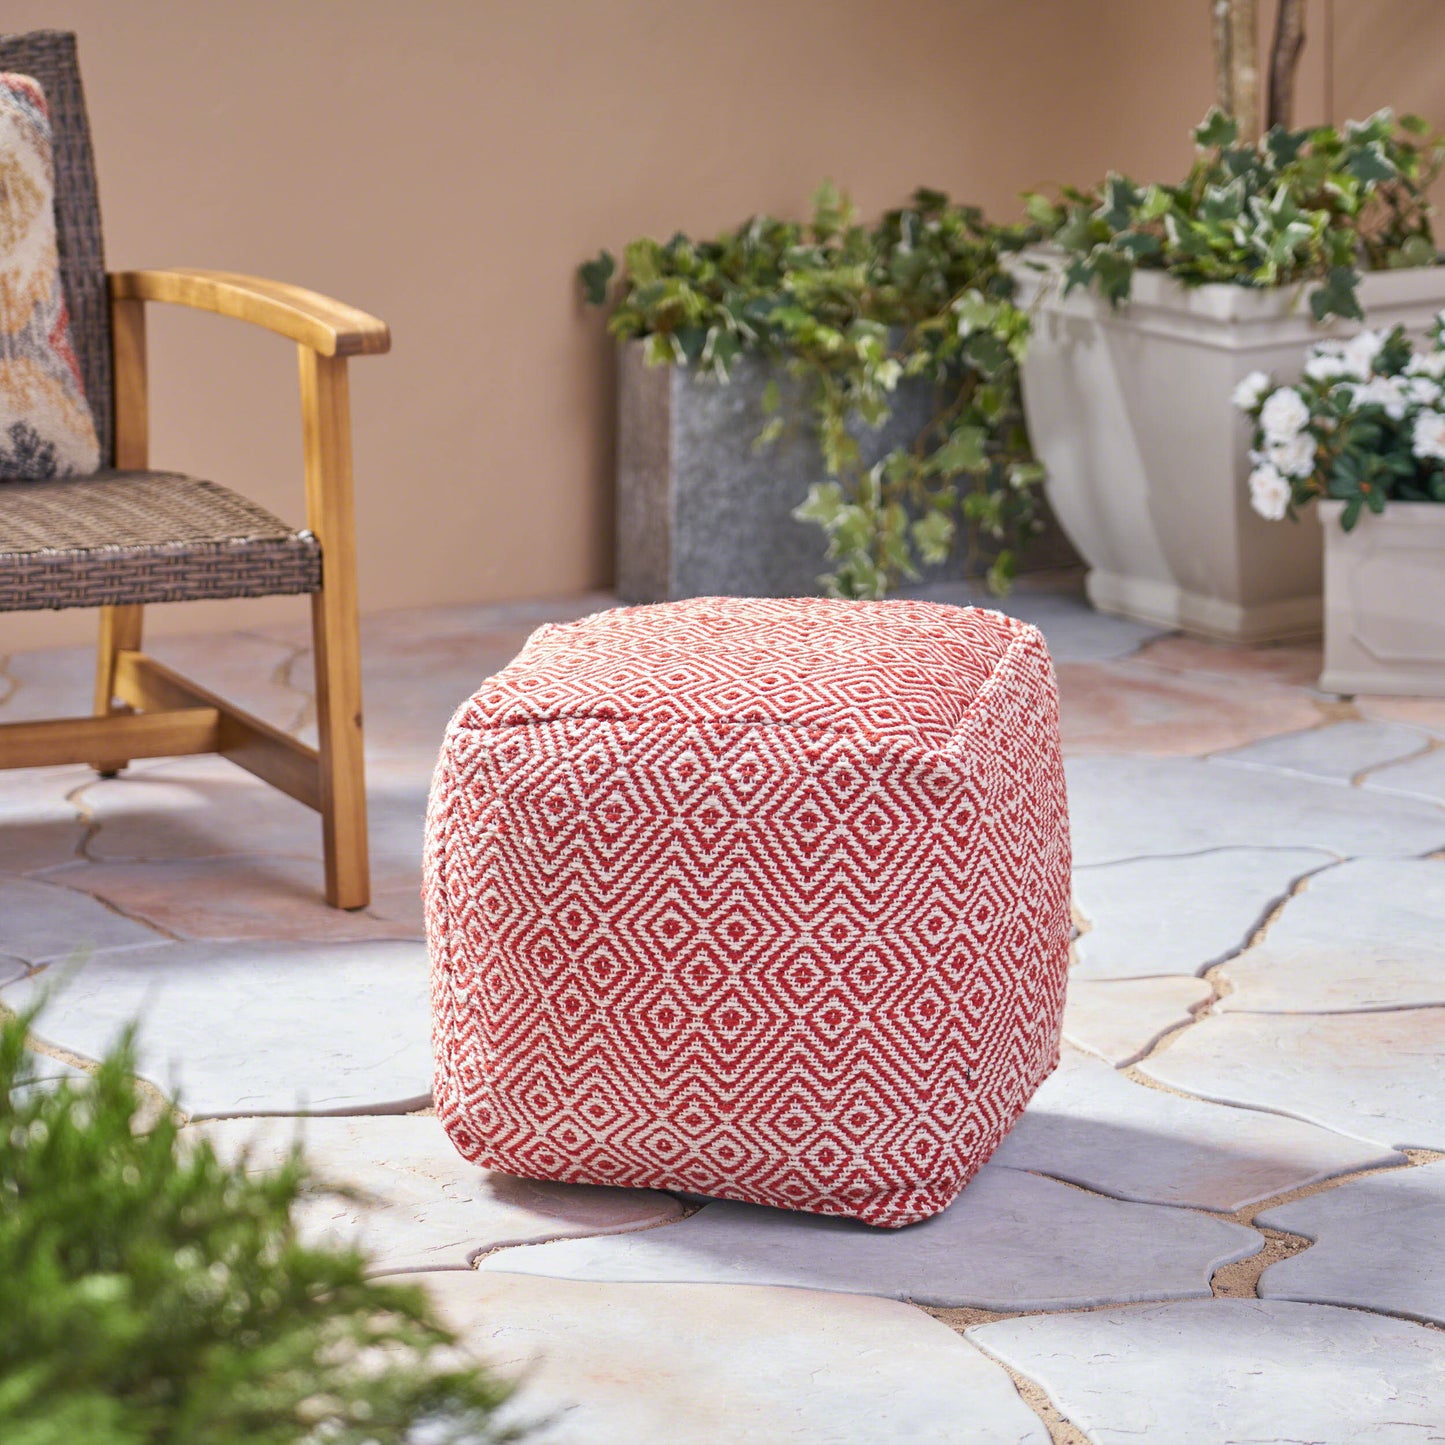 Alston Outdoor Handcrafted Boho Water-Resistant Pouf